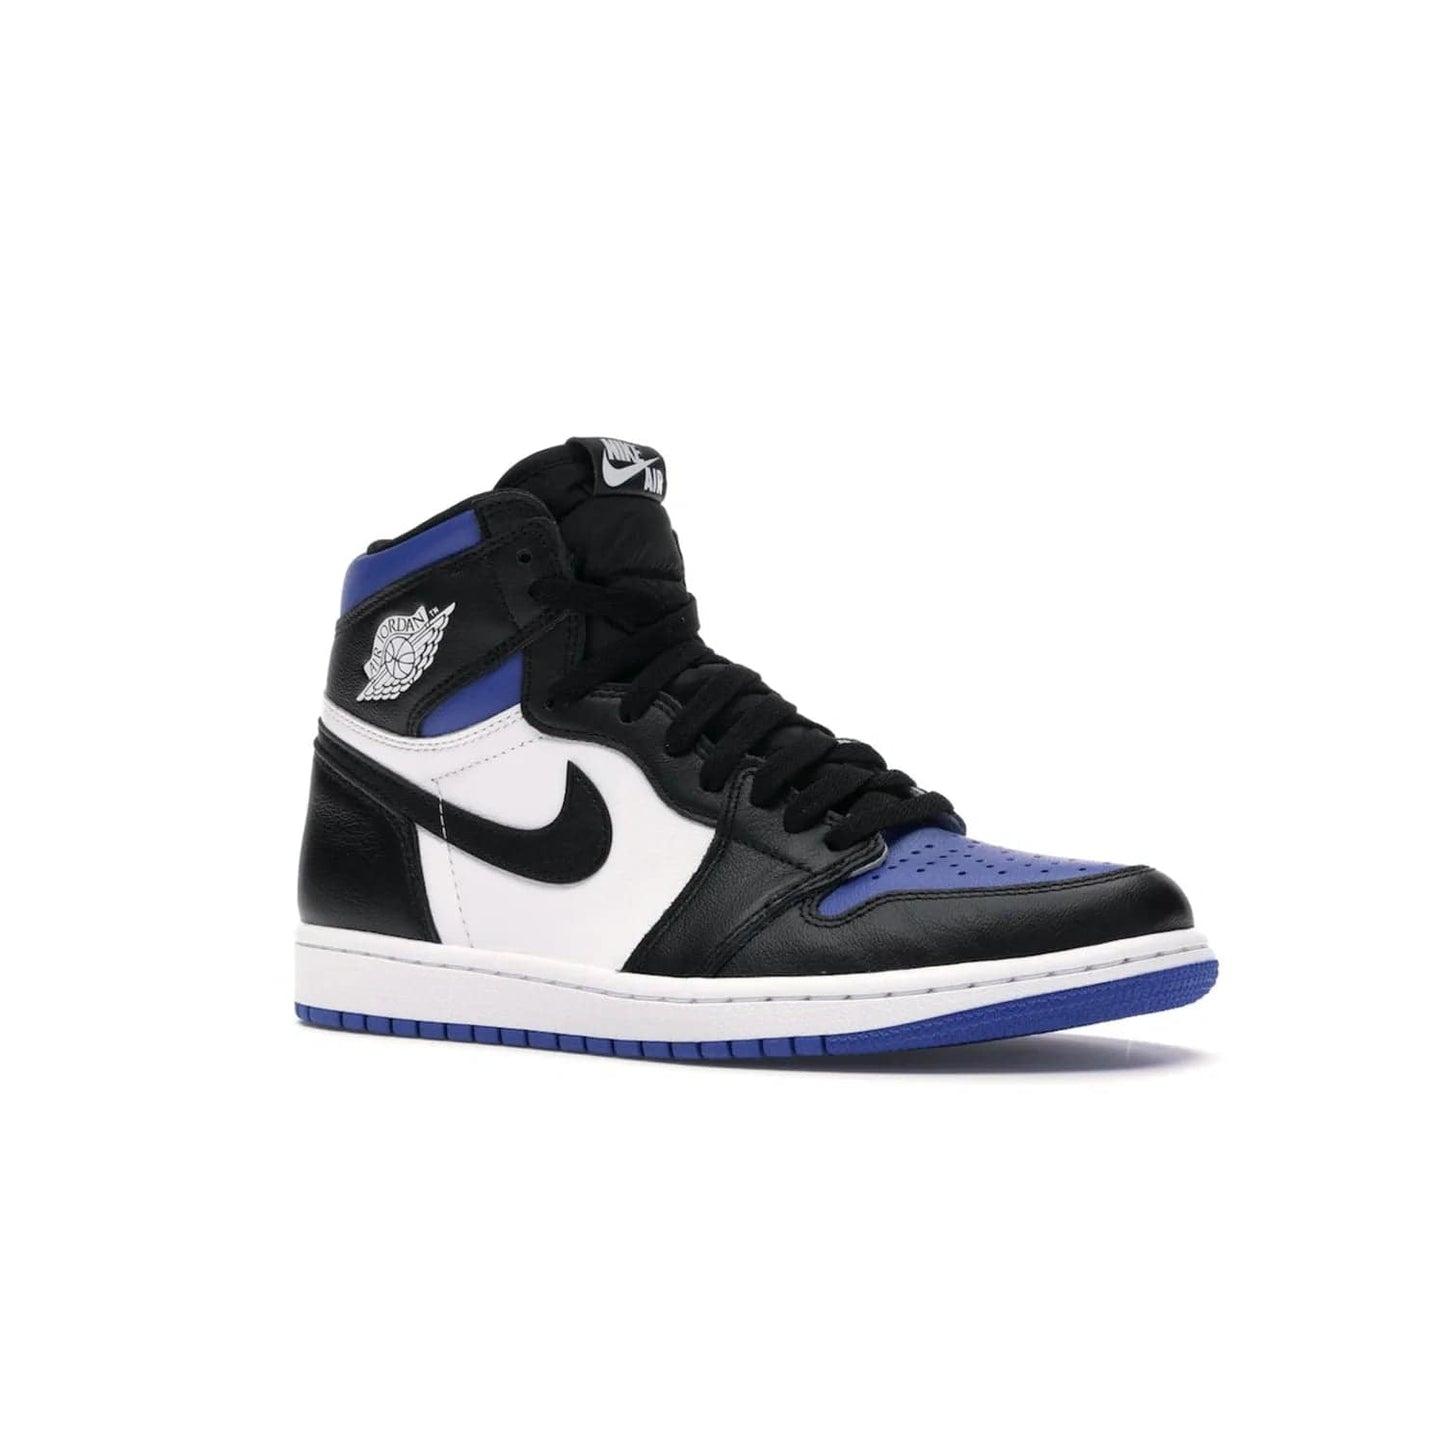 Jordan 1 Retro High Royal Toe - Image 4 - Only at www.BallersClubKickz.com - Refresh your look with the Jordan 1 Retro High Royal Toe. This classic AJ 1 sports a white and royal leather upper, black leather overlays, and branded leather tongue tag. Pick up today and set the streets ablaze.